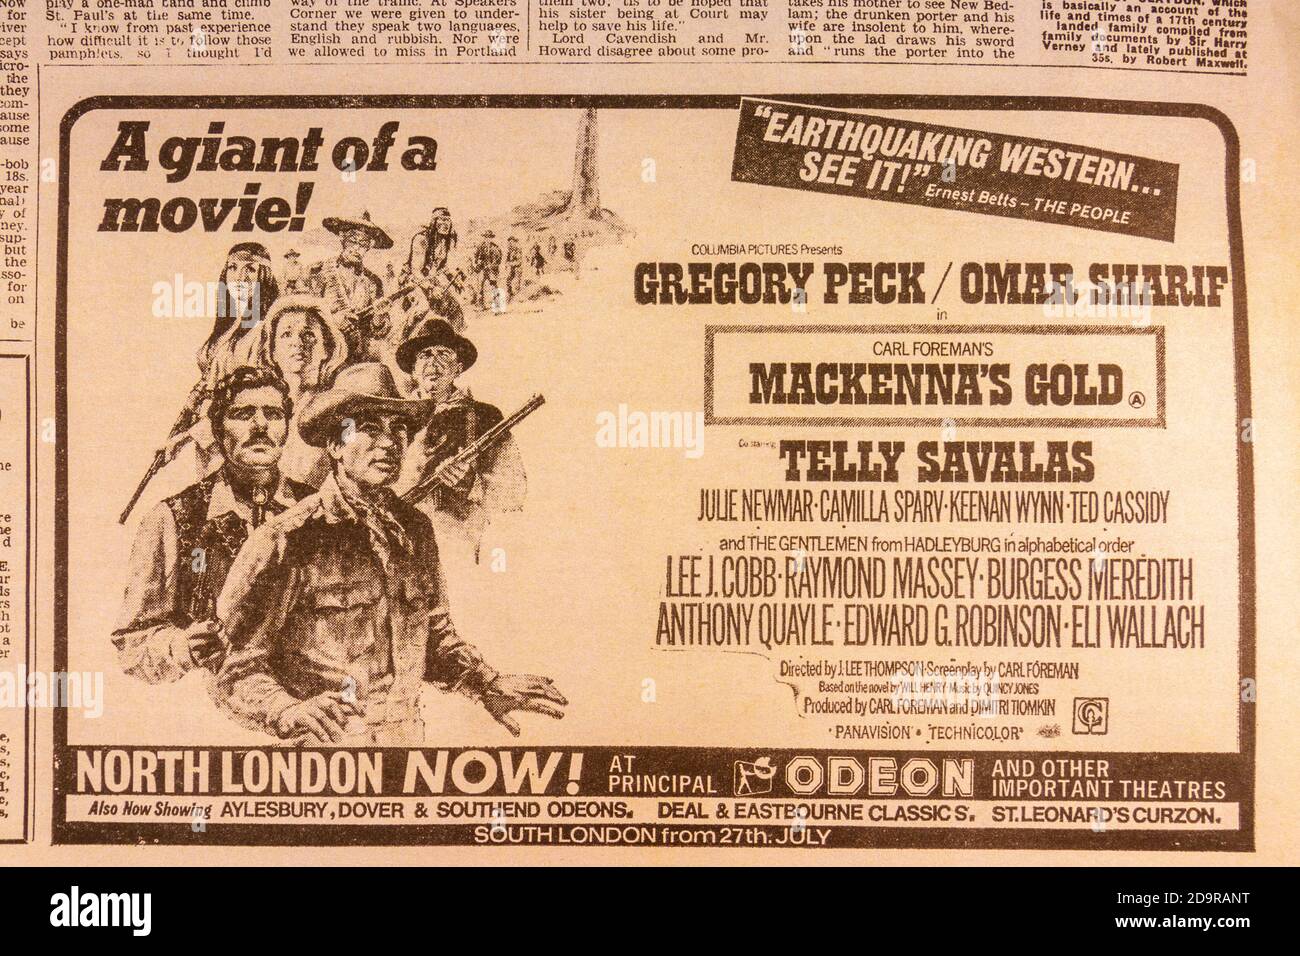 Advert for the film 'Mackenna's Gold' inside an Evening Standard souvenir newspaper (replica) for the Apollo 11 Moon landings on 21st July 1969. Stock Photo